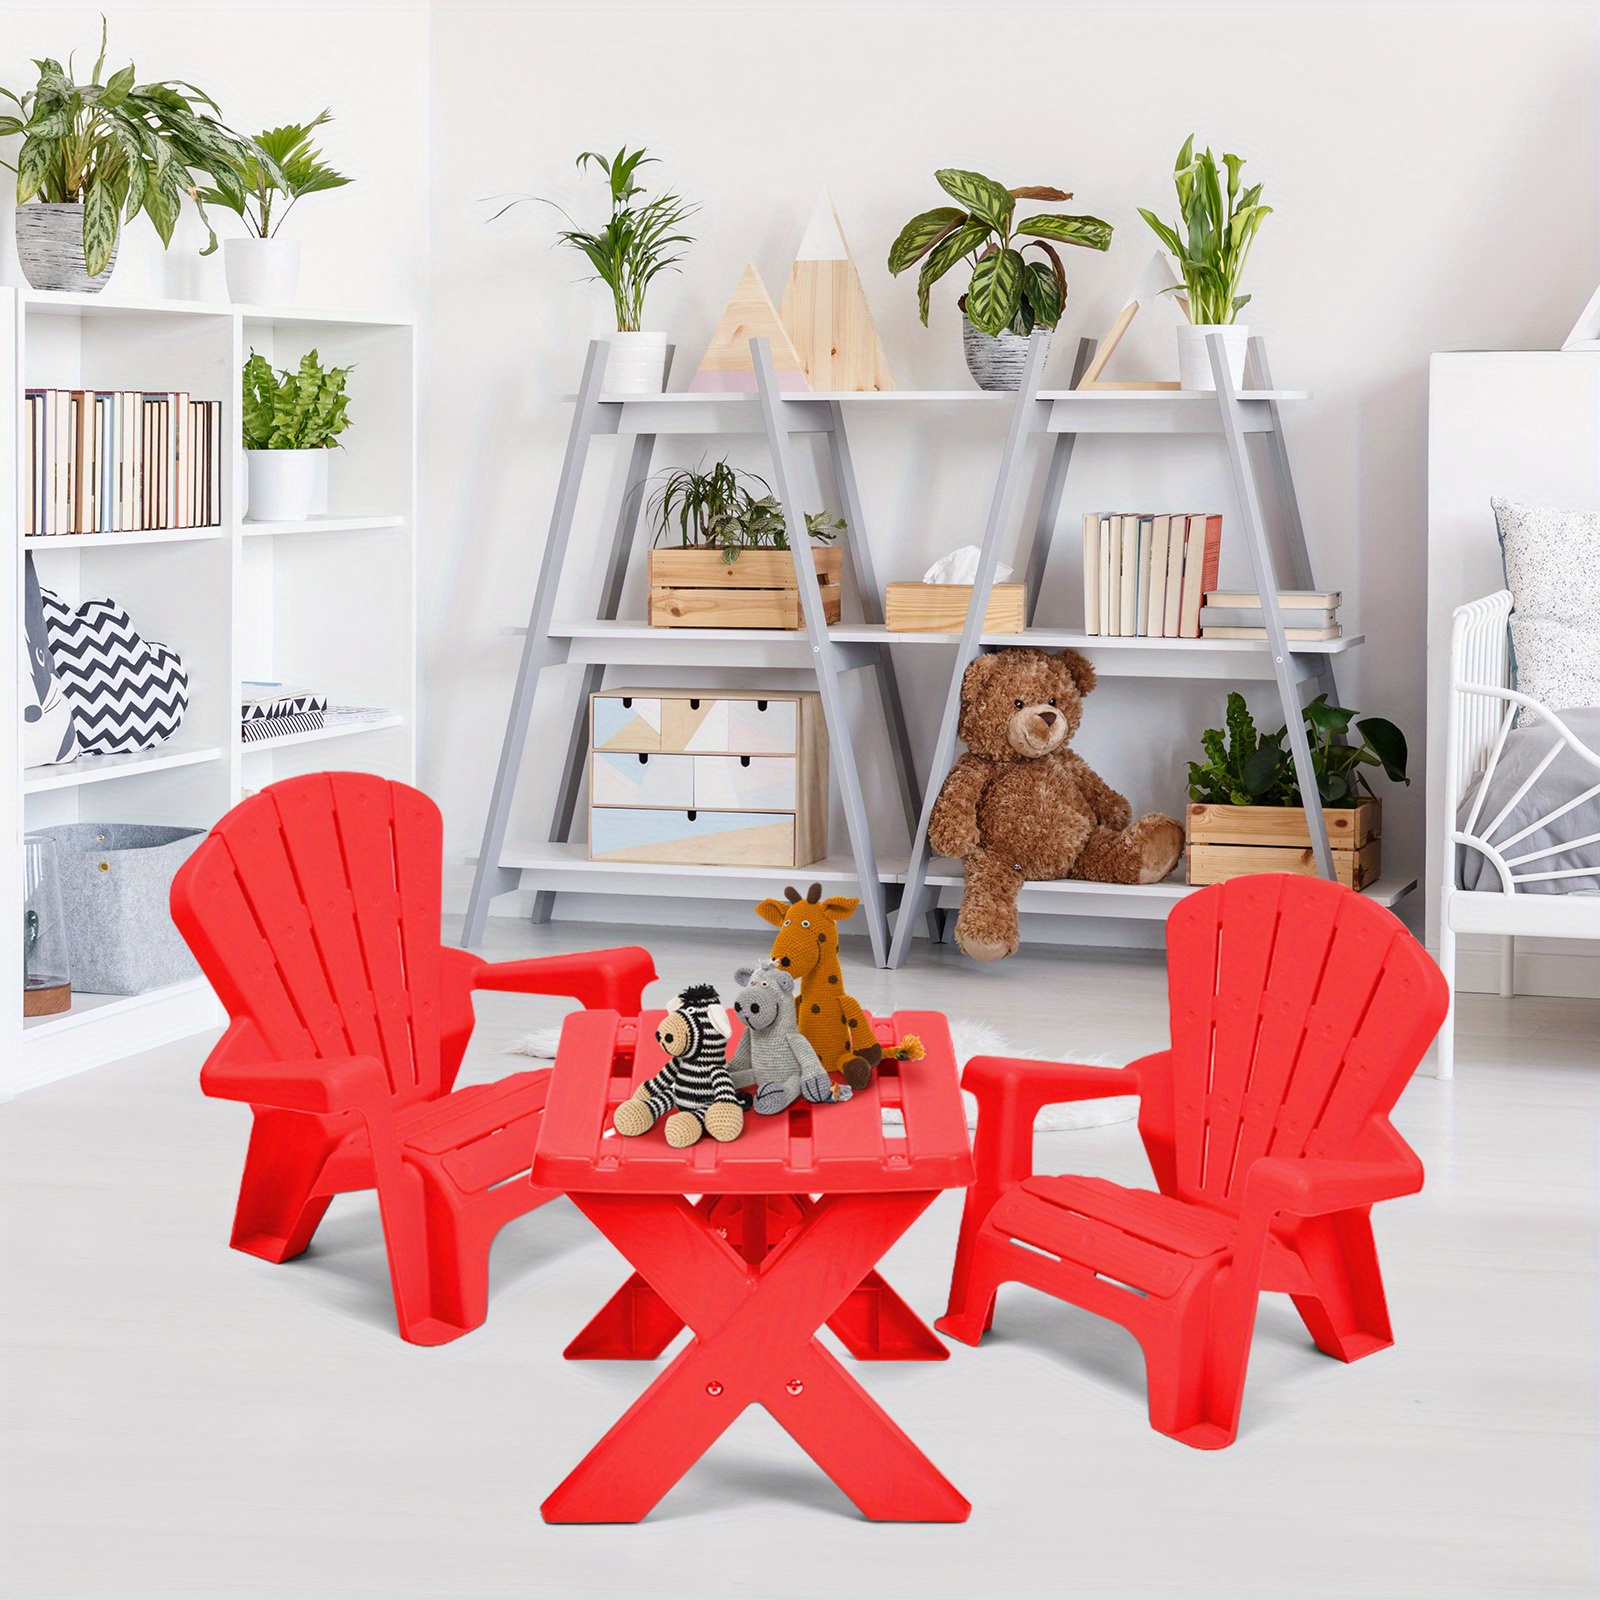 

Maxmass 3 Pcs Kids Table &chair Set Plastic Children Studying Play Table Classroom Red